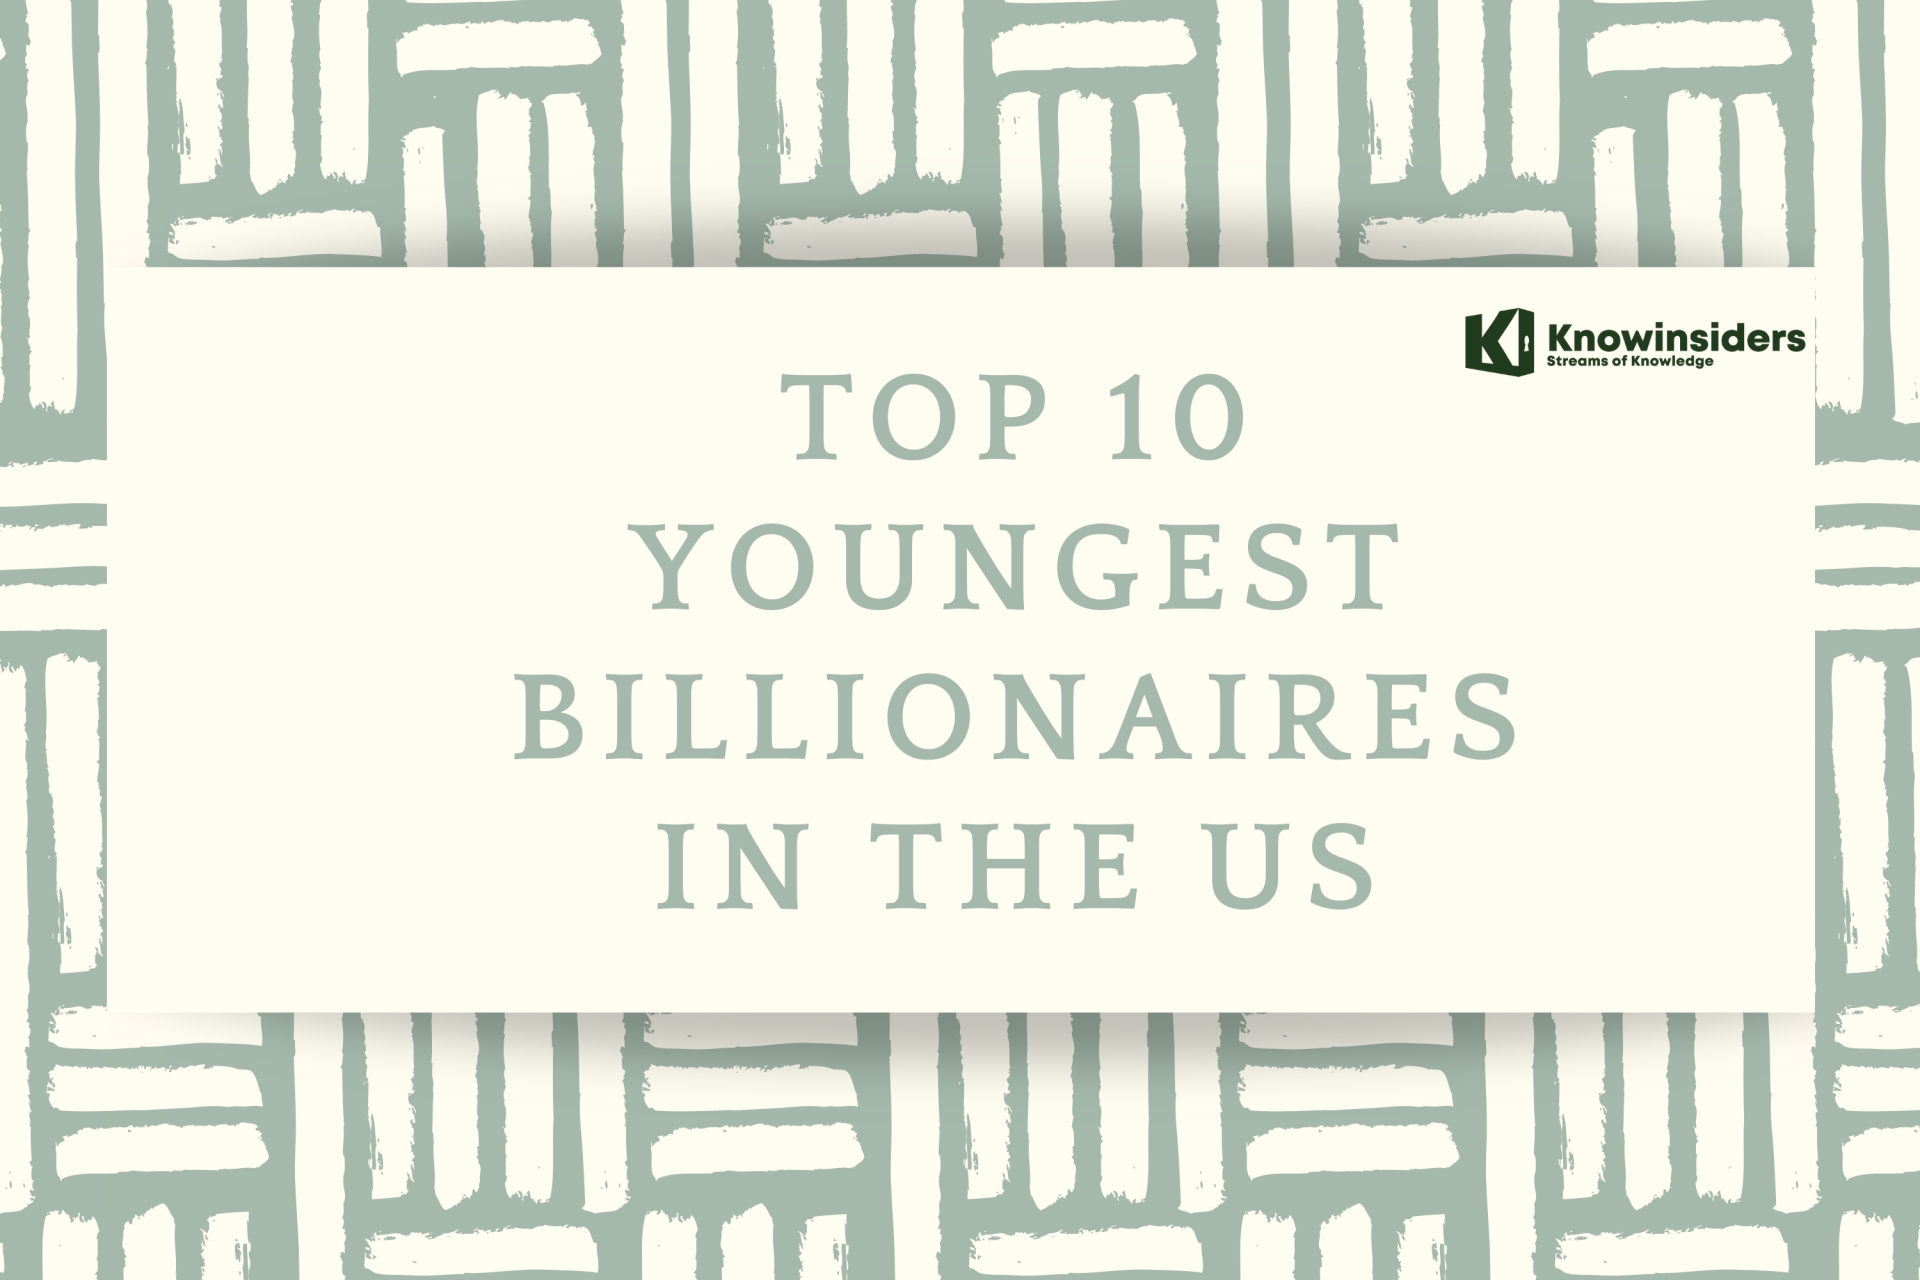 Top 10 Youngest Billionaires In The US for 2022